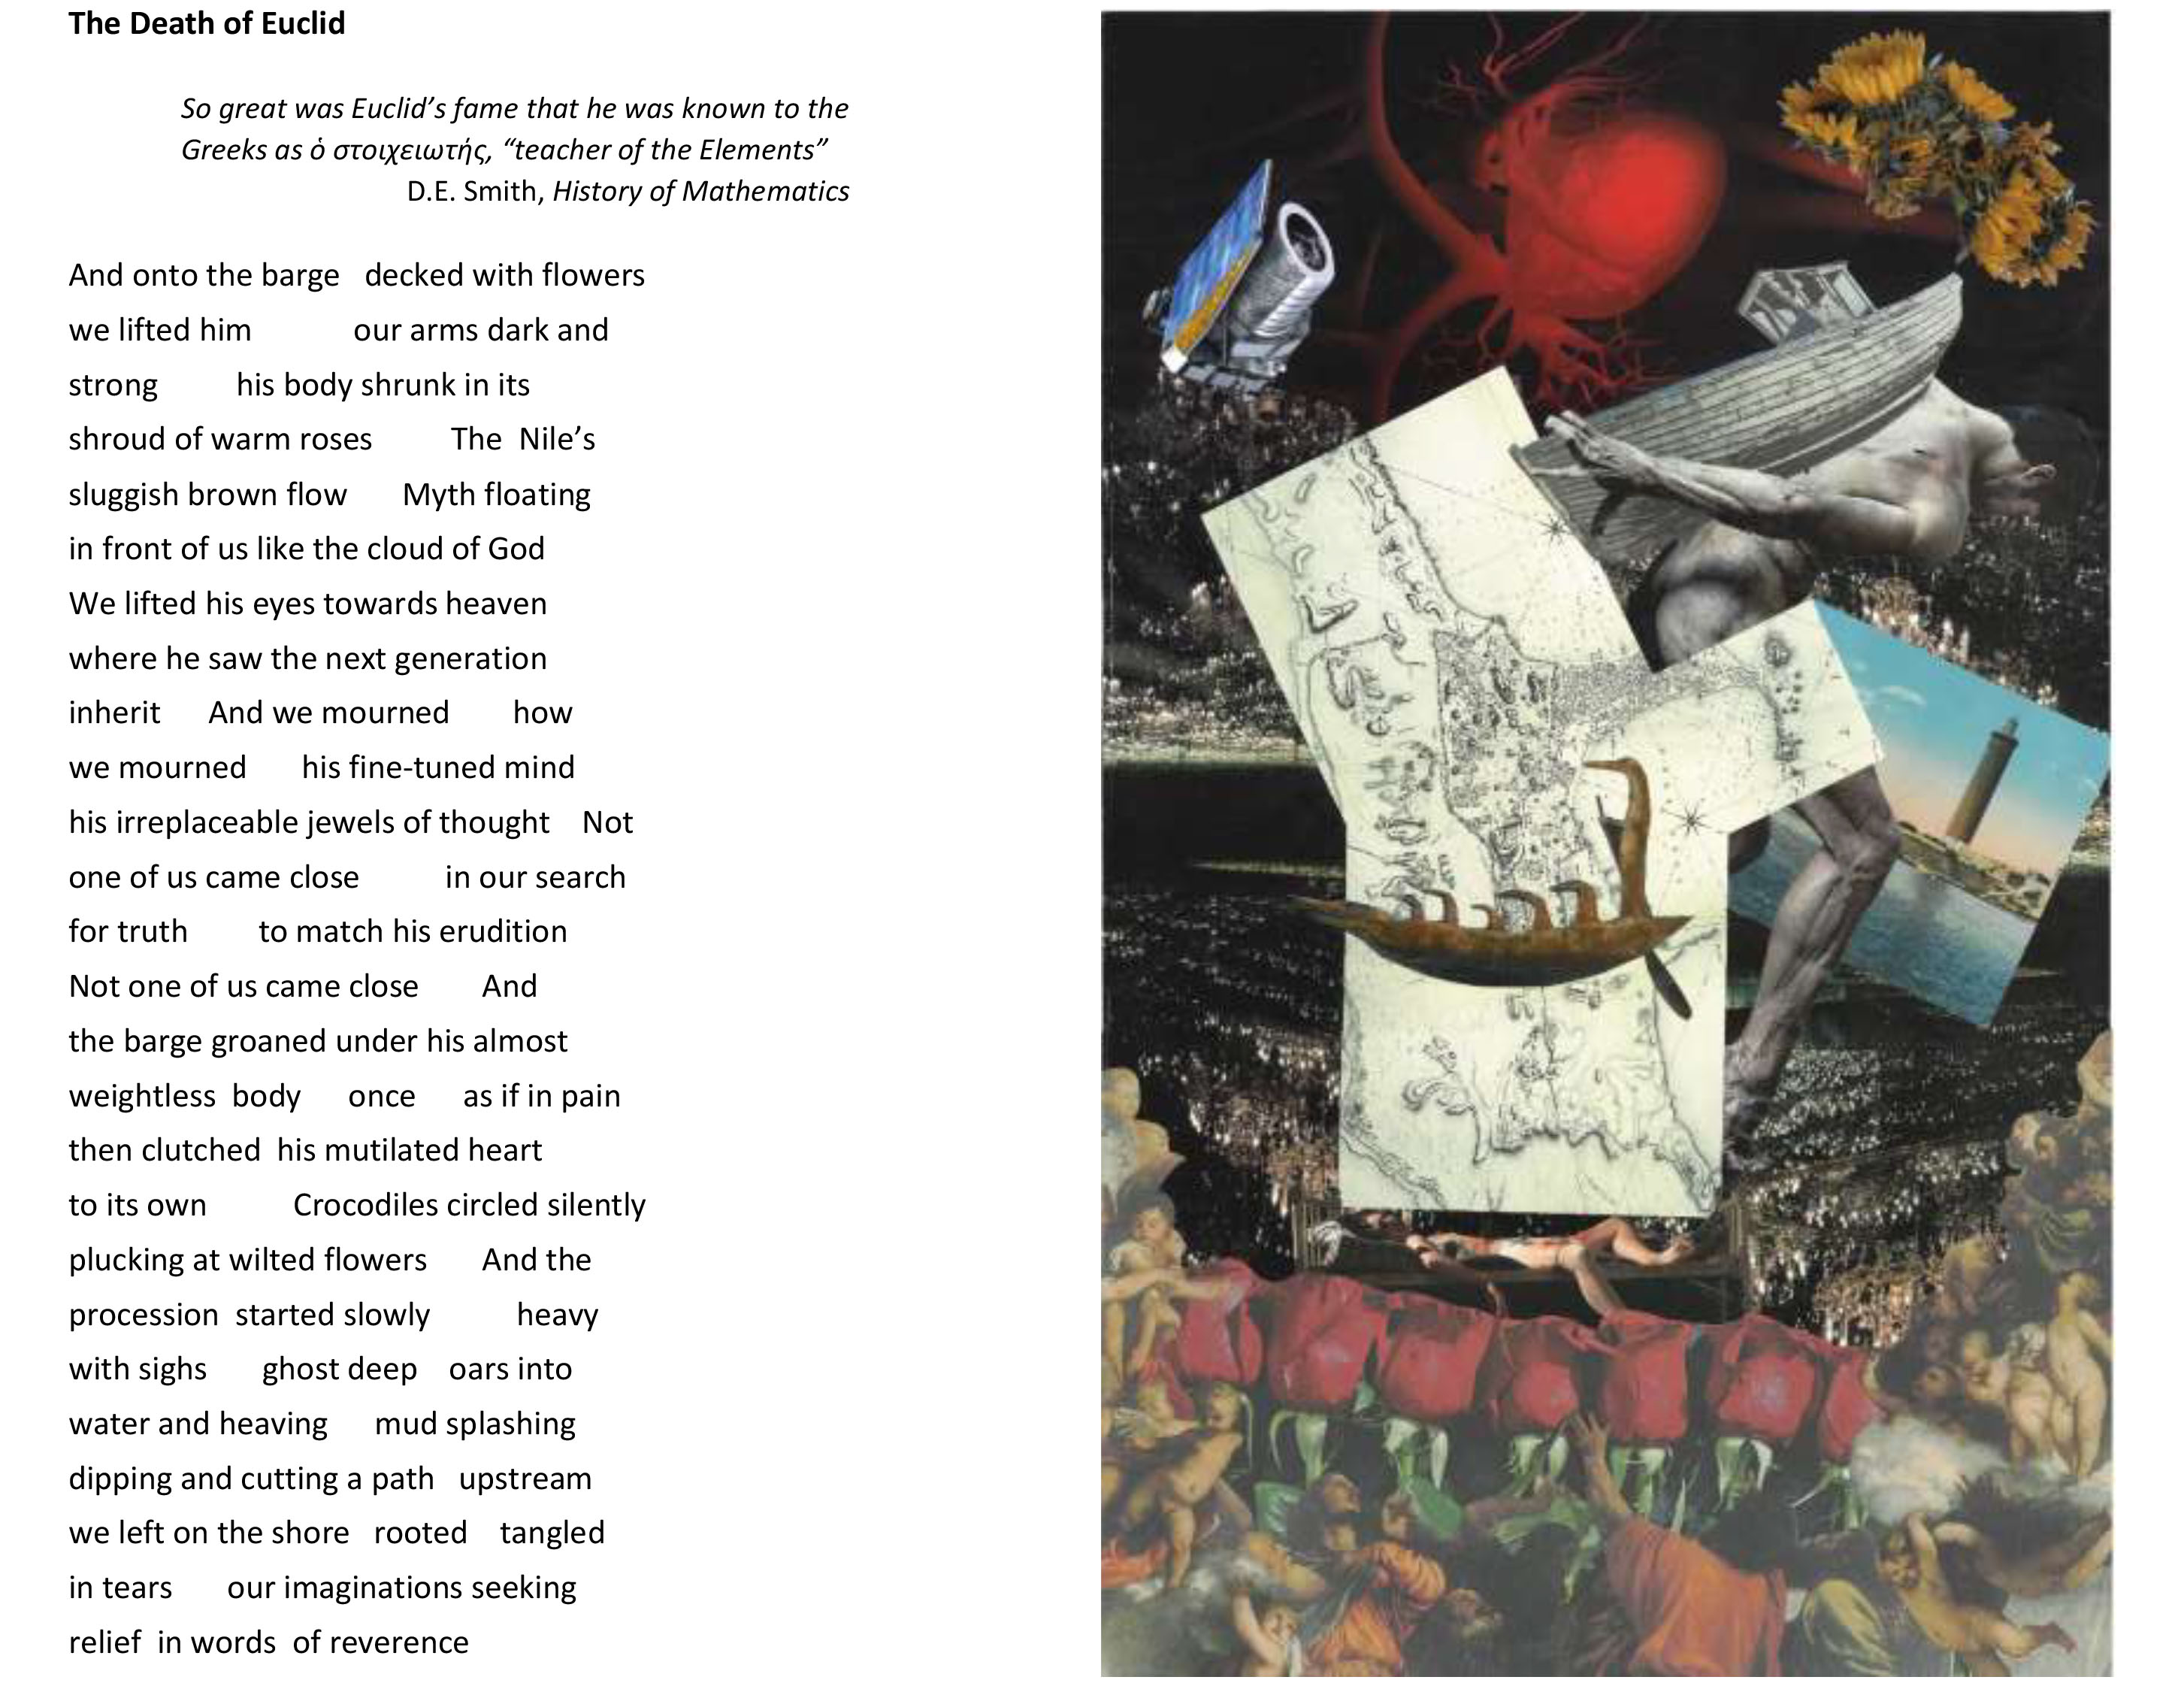 The Death of Euclid poem-collage